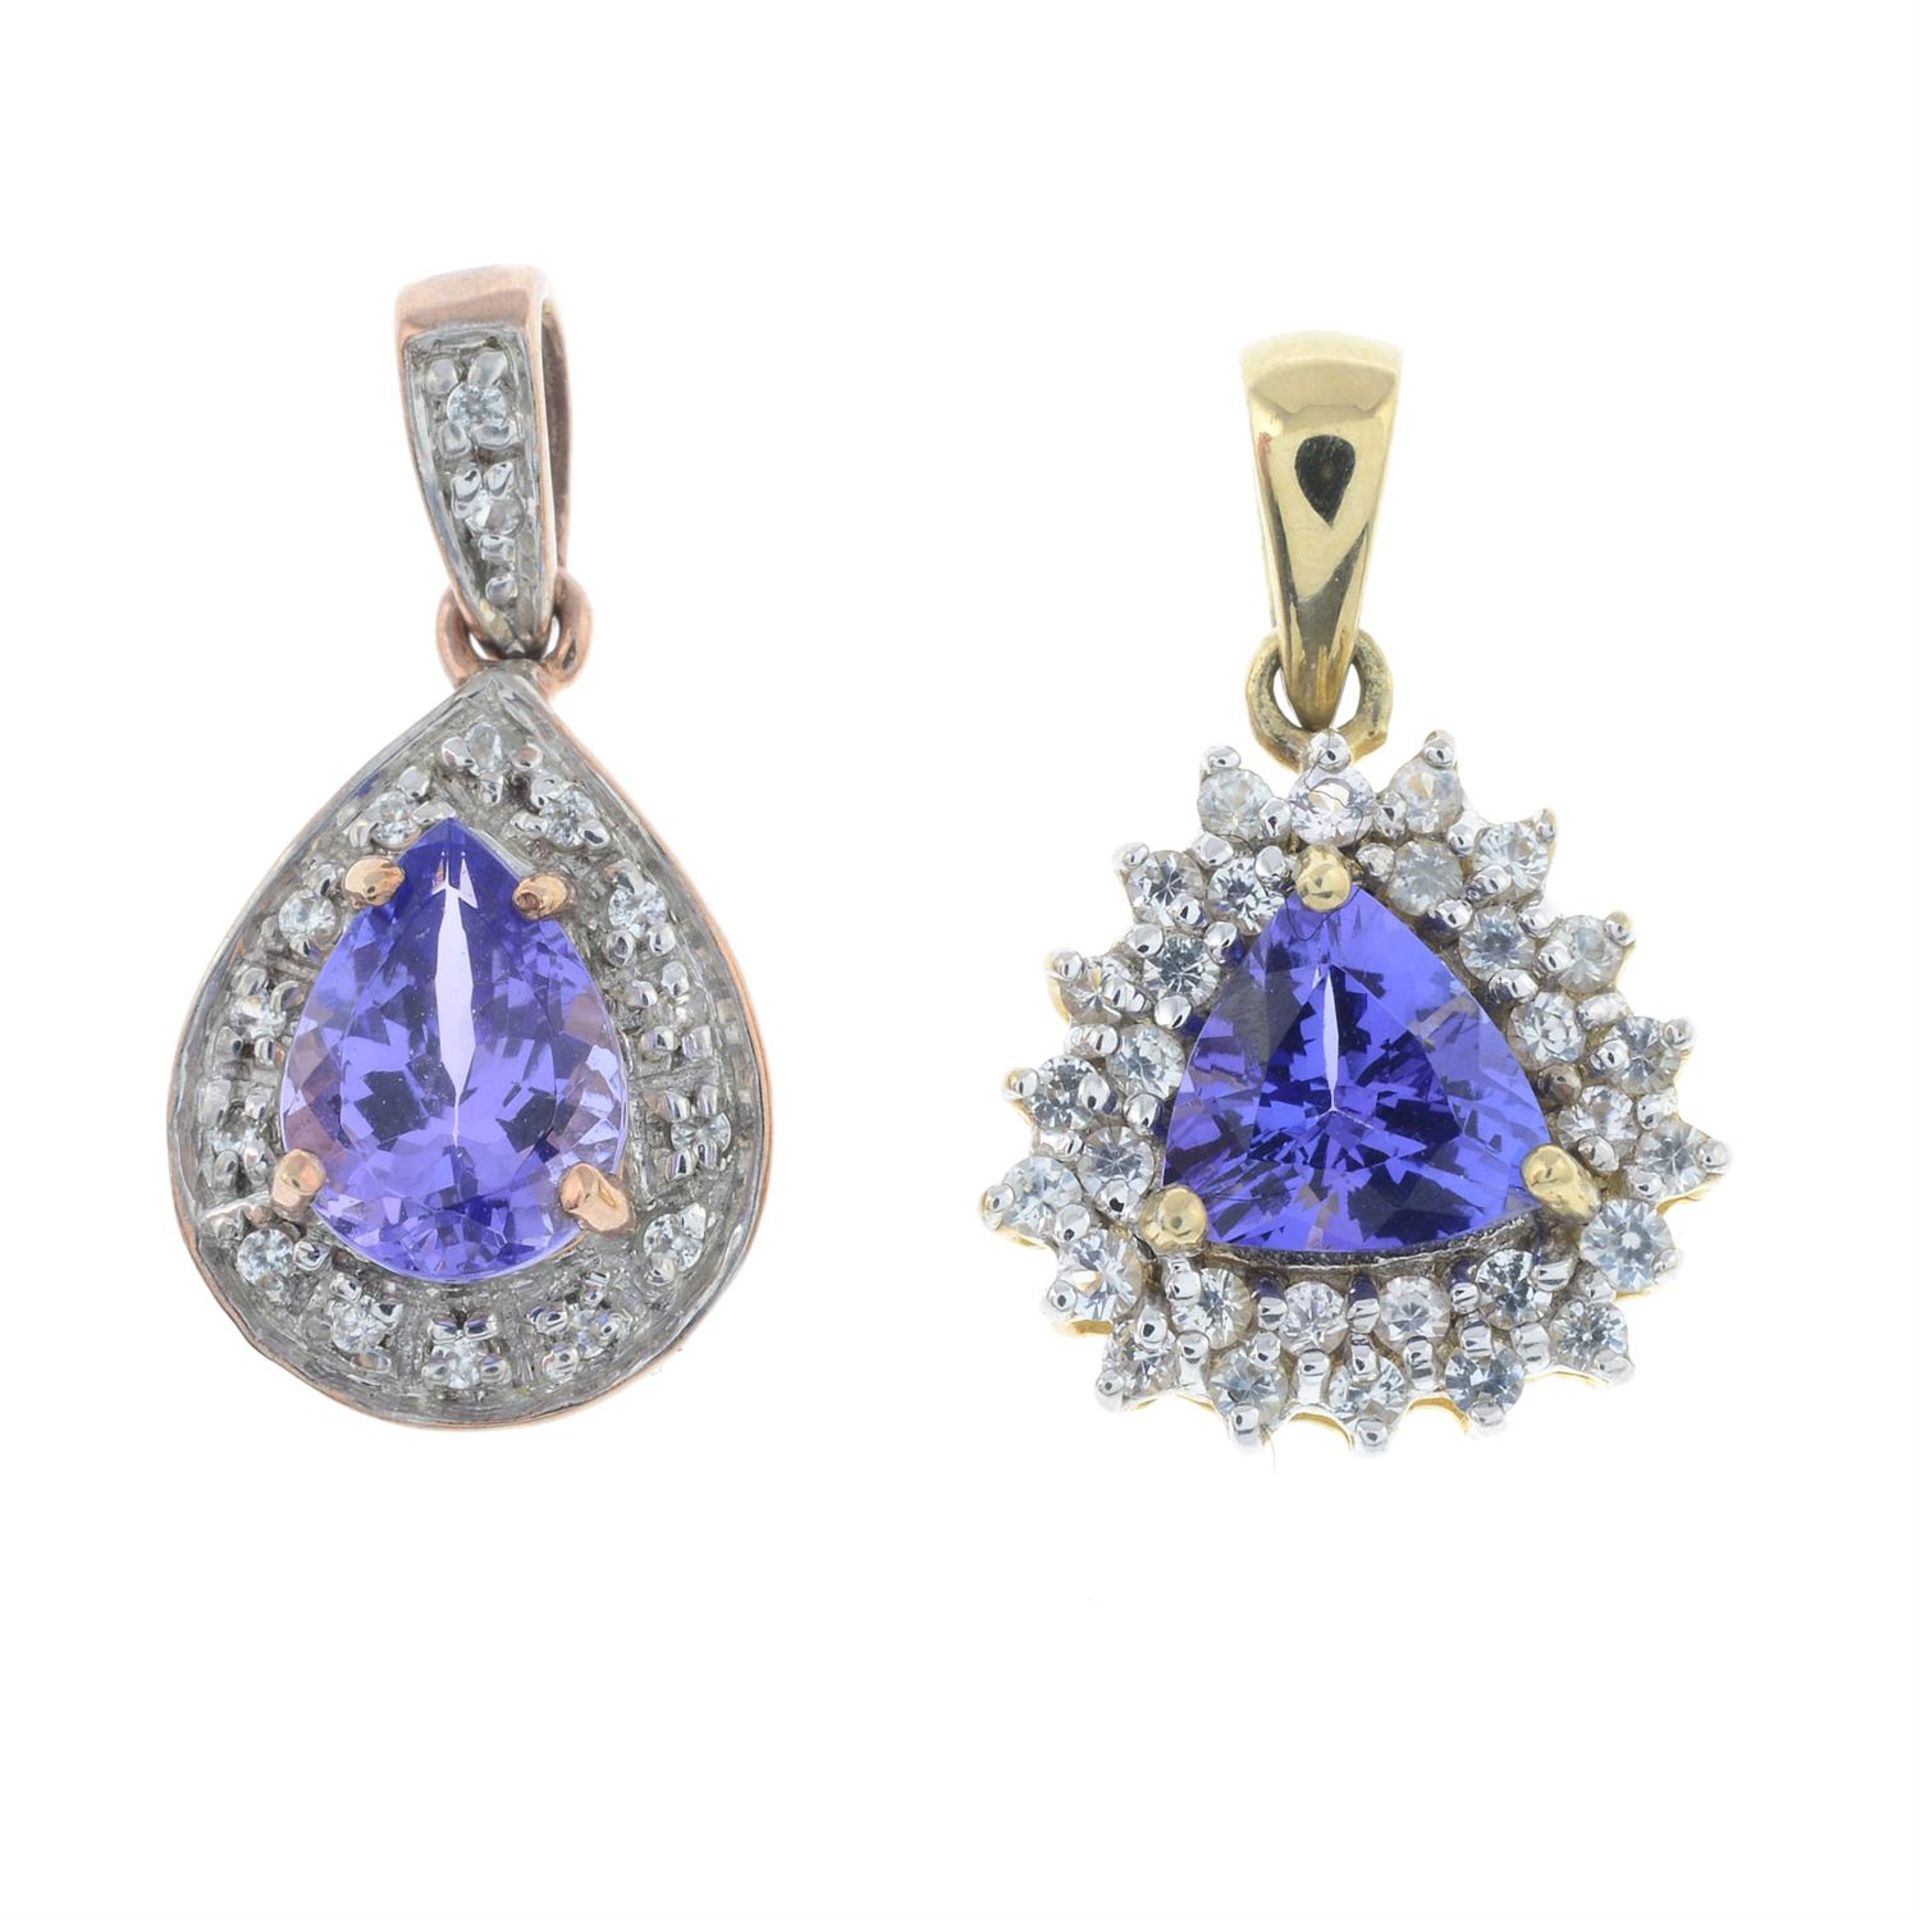 Two tanzanite and colourless gem pendants.